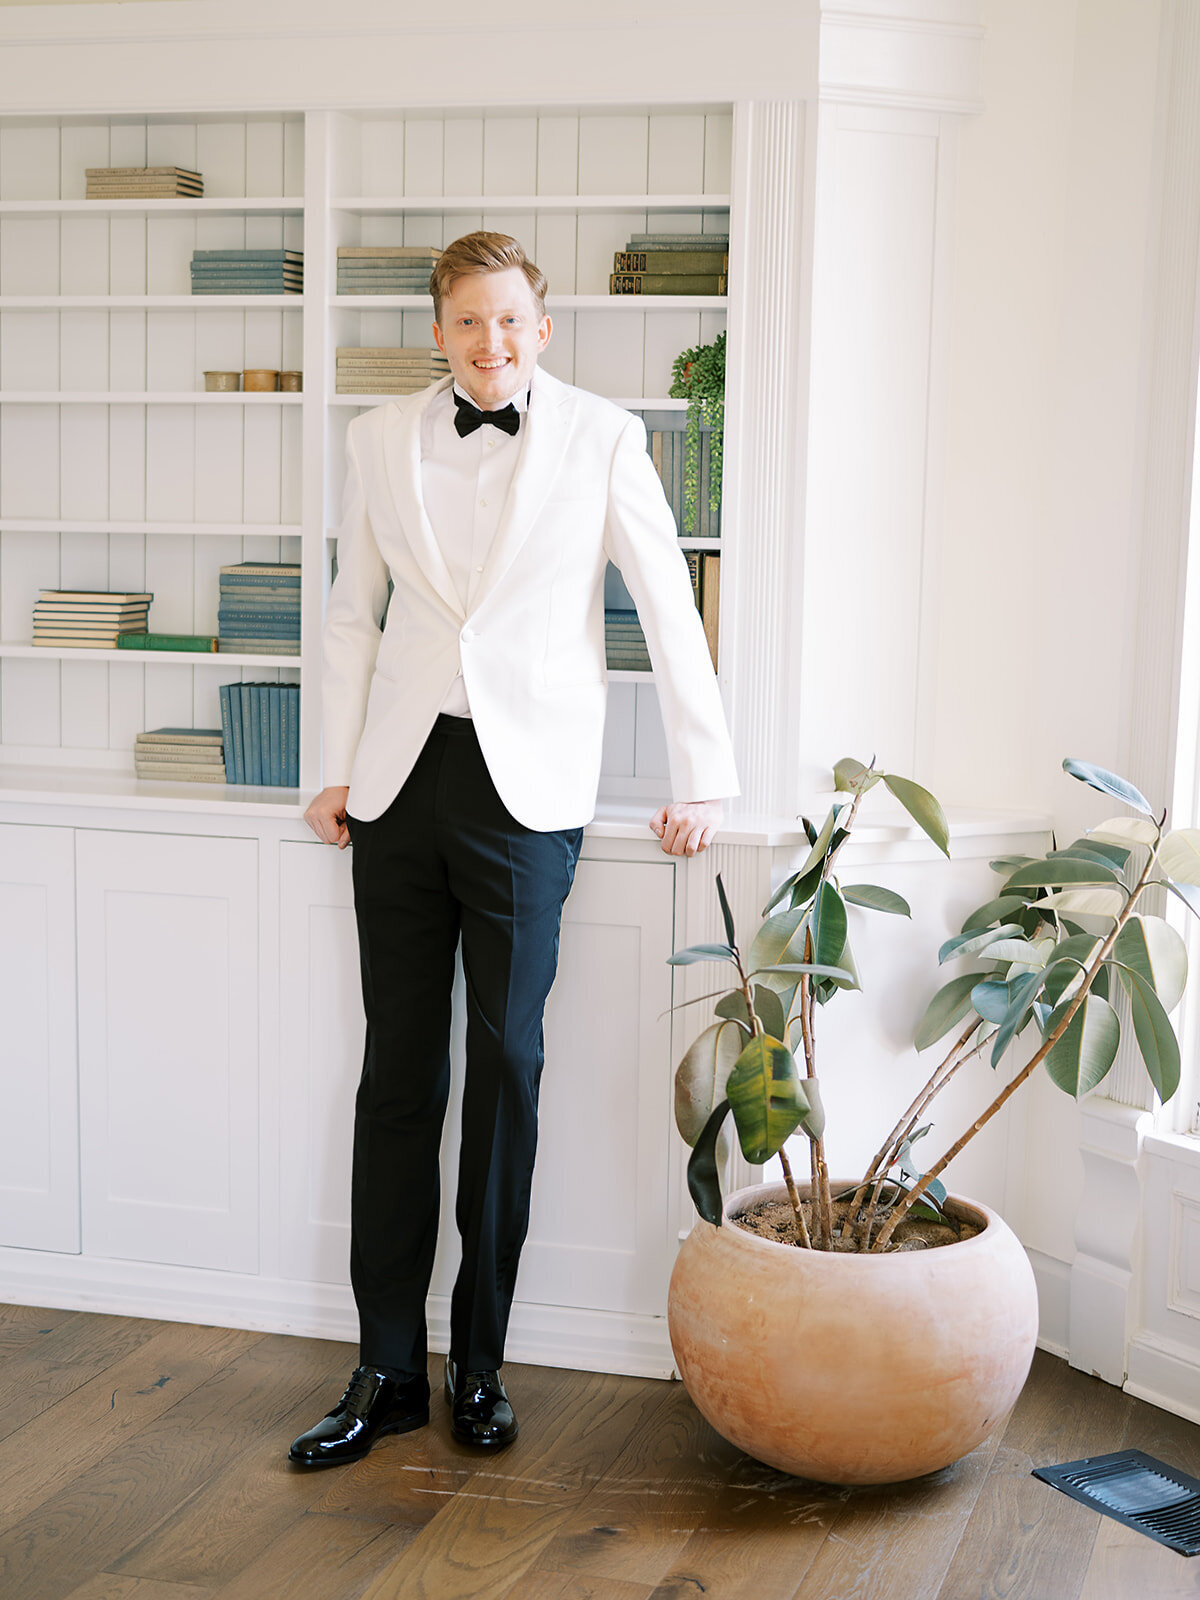 The groom poses in front of a bookshelf inside the old home at The Grand Lady